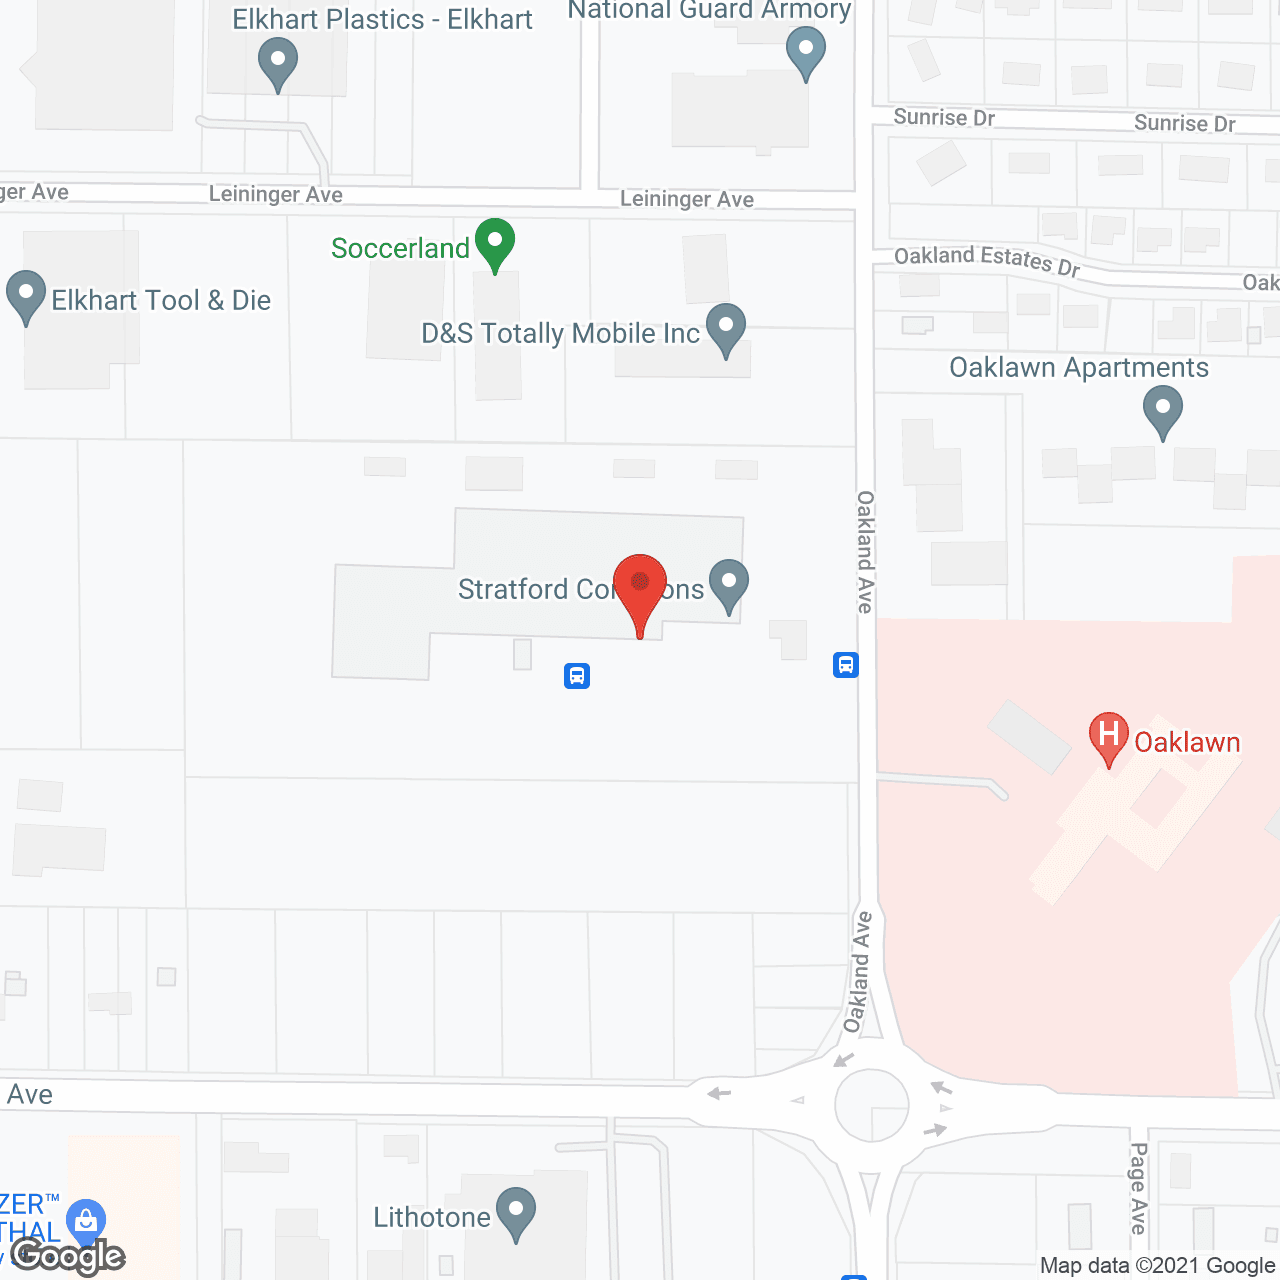 Stratford Commons in google map